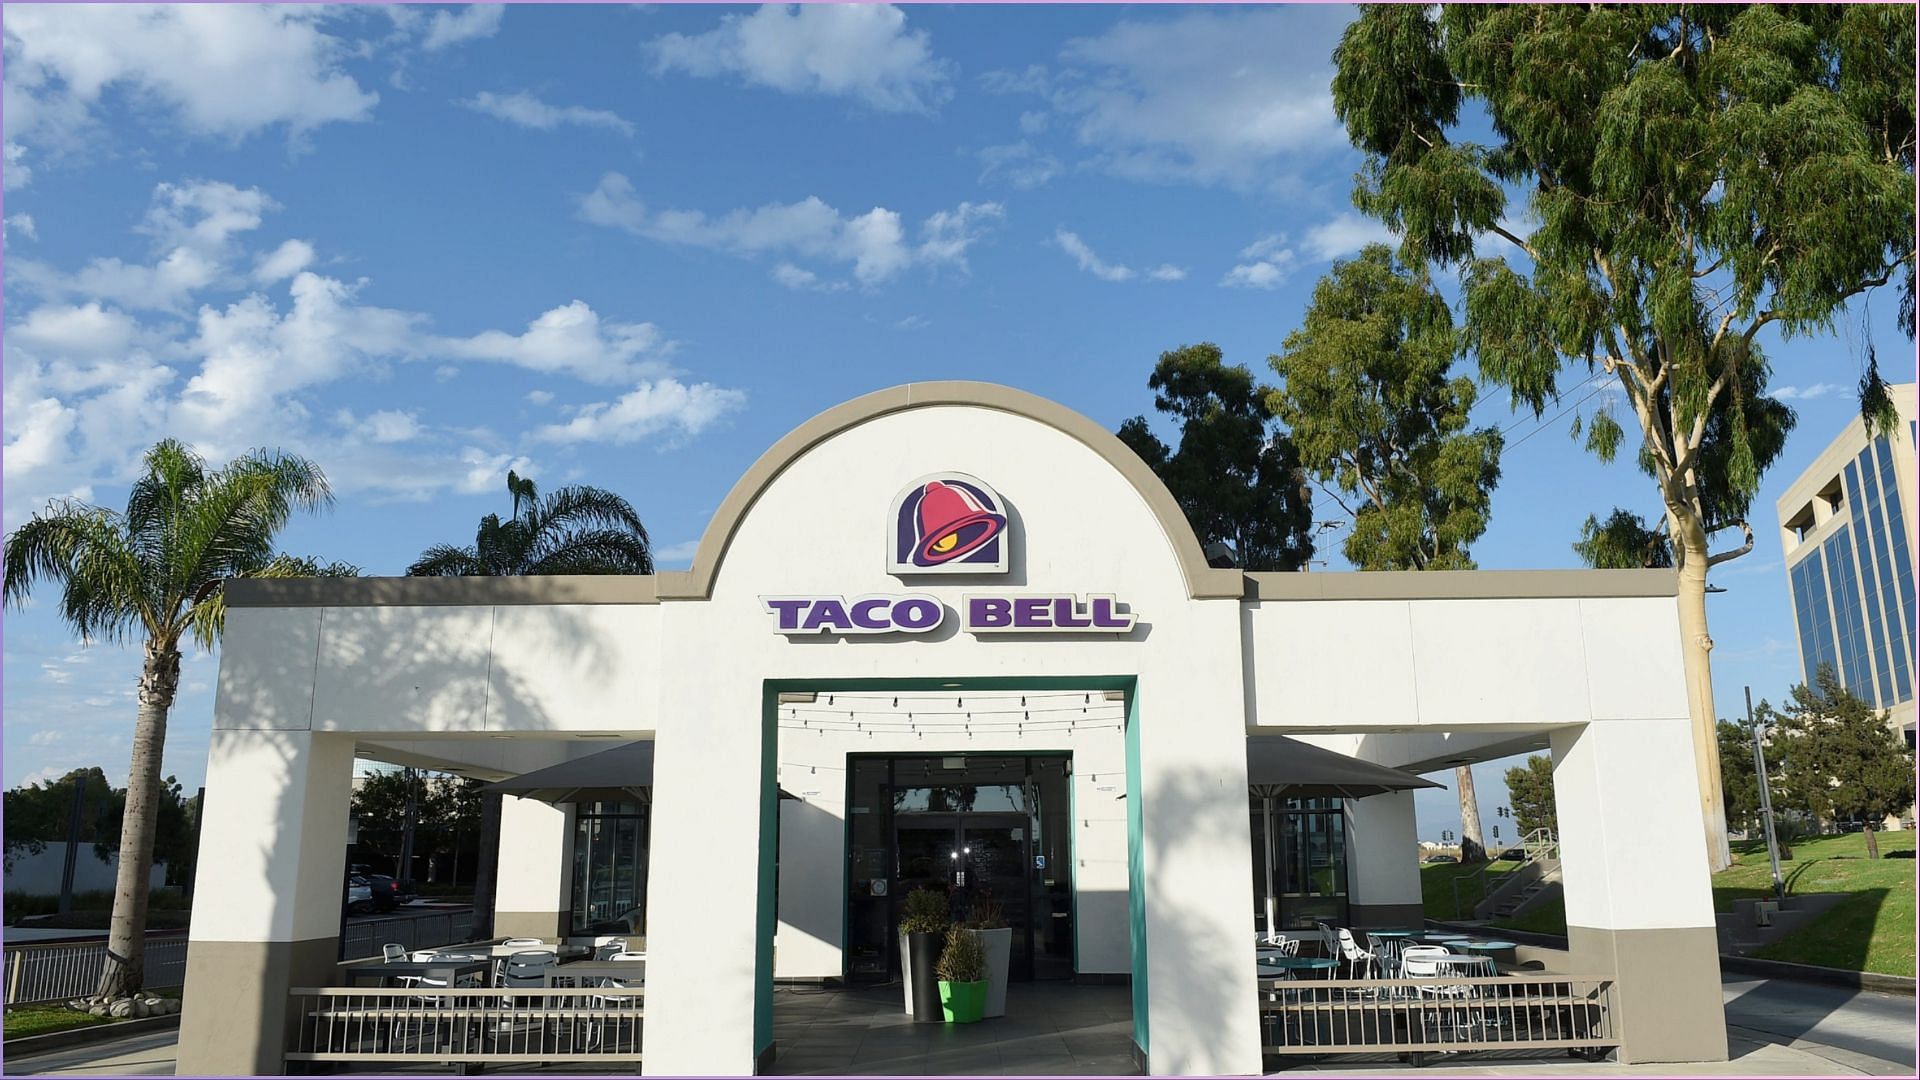 Taco Bell introduces new in-app and third-party delivery deals (Image via Taco Bell/Blanchard/Getty Images)